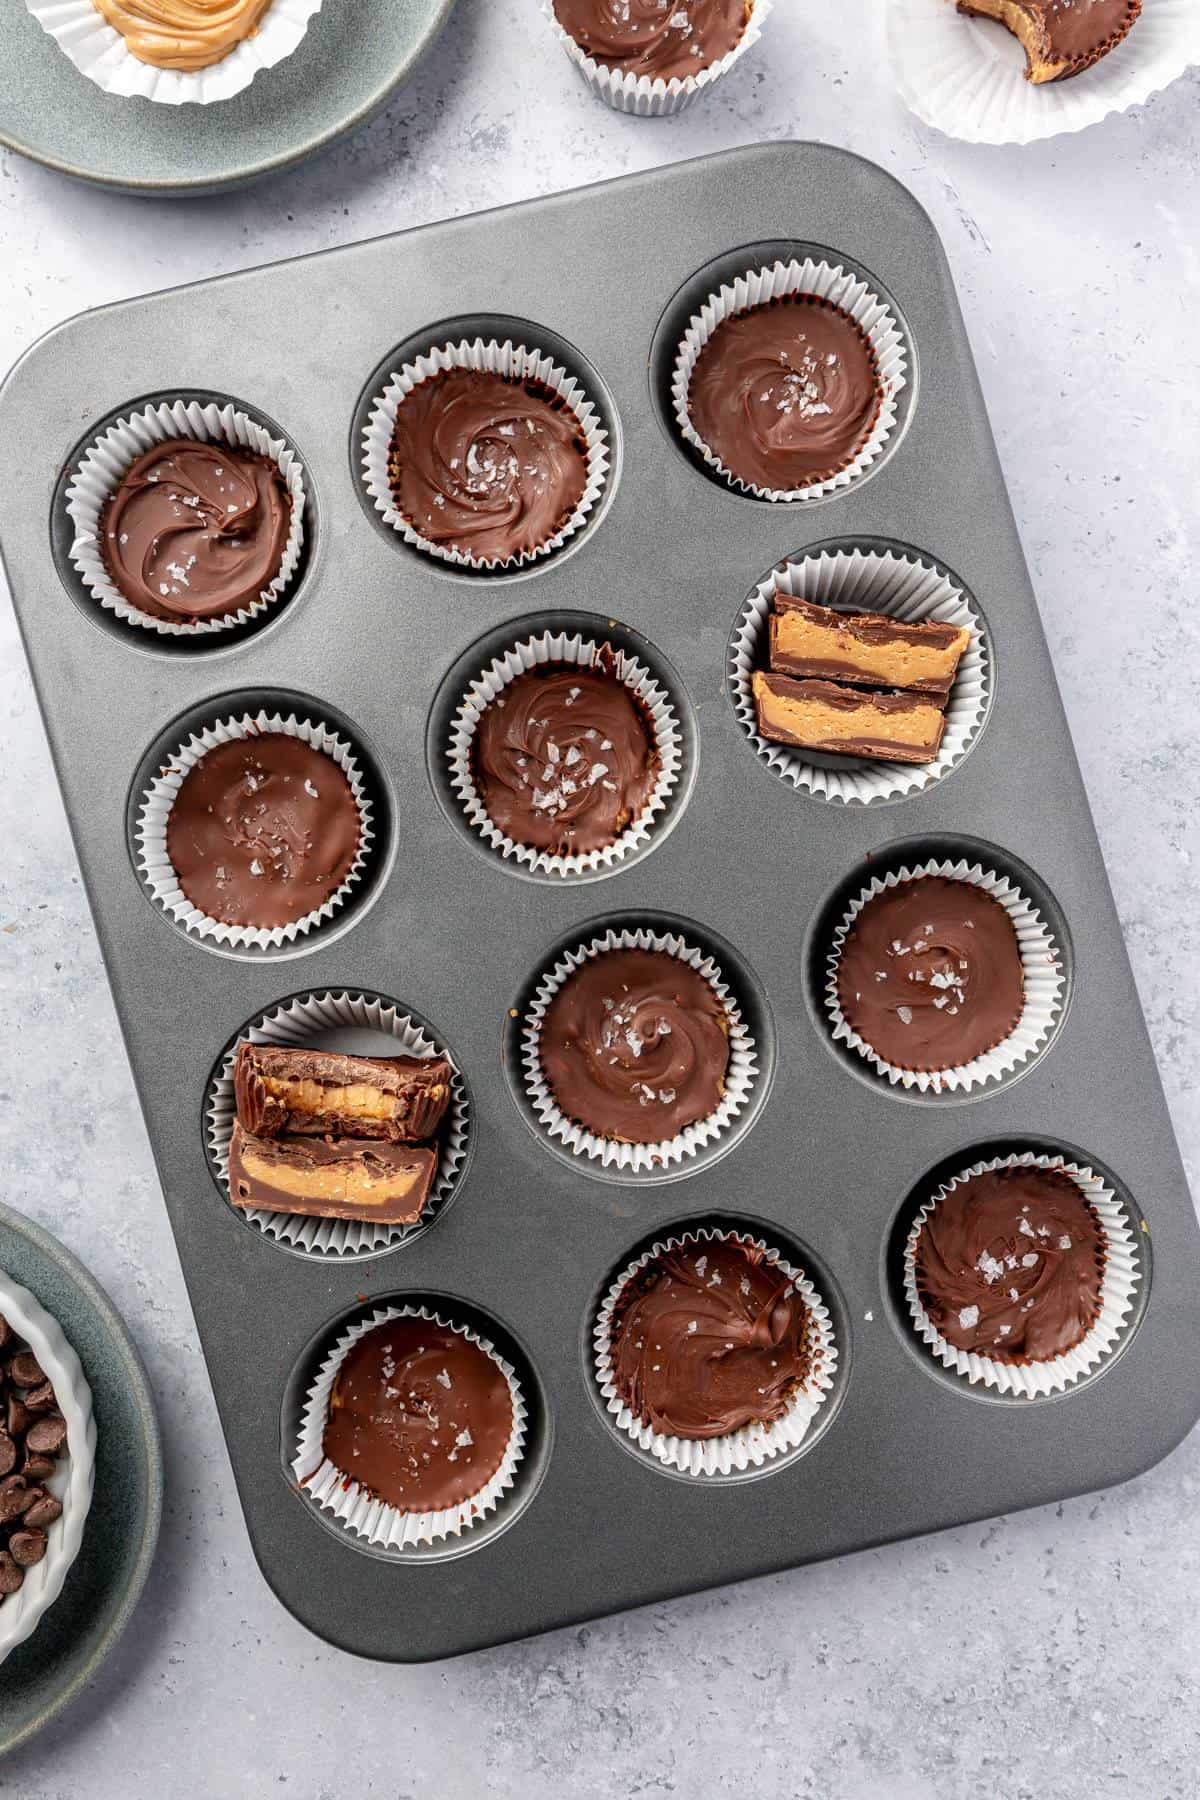 Homemade peanut butter cups in a paper-lined muffin tin.